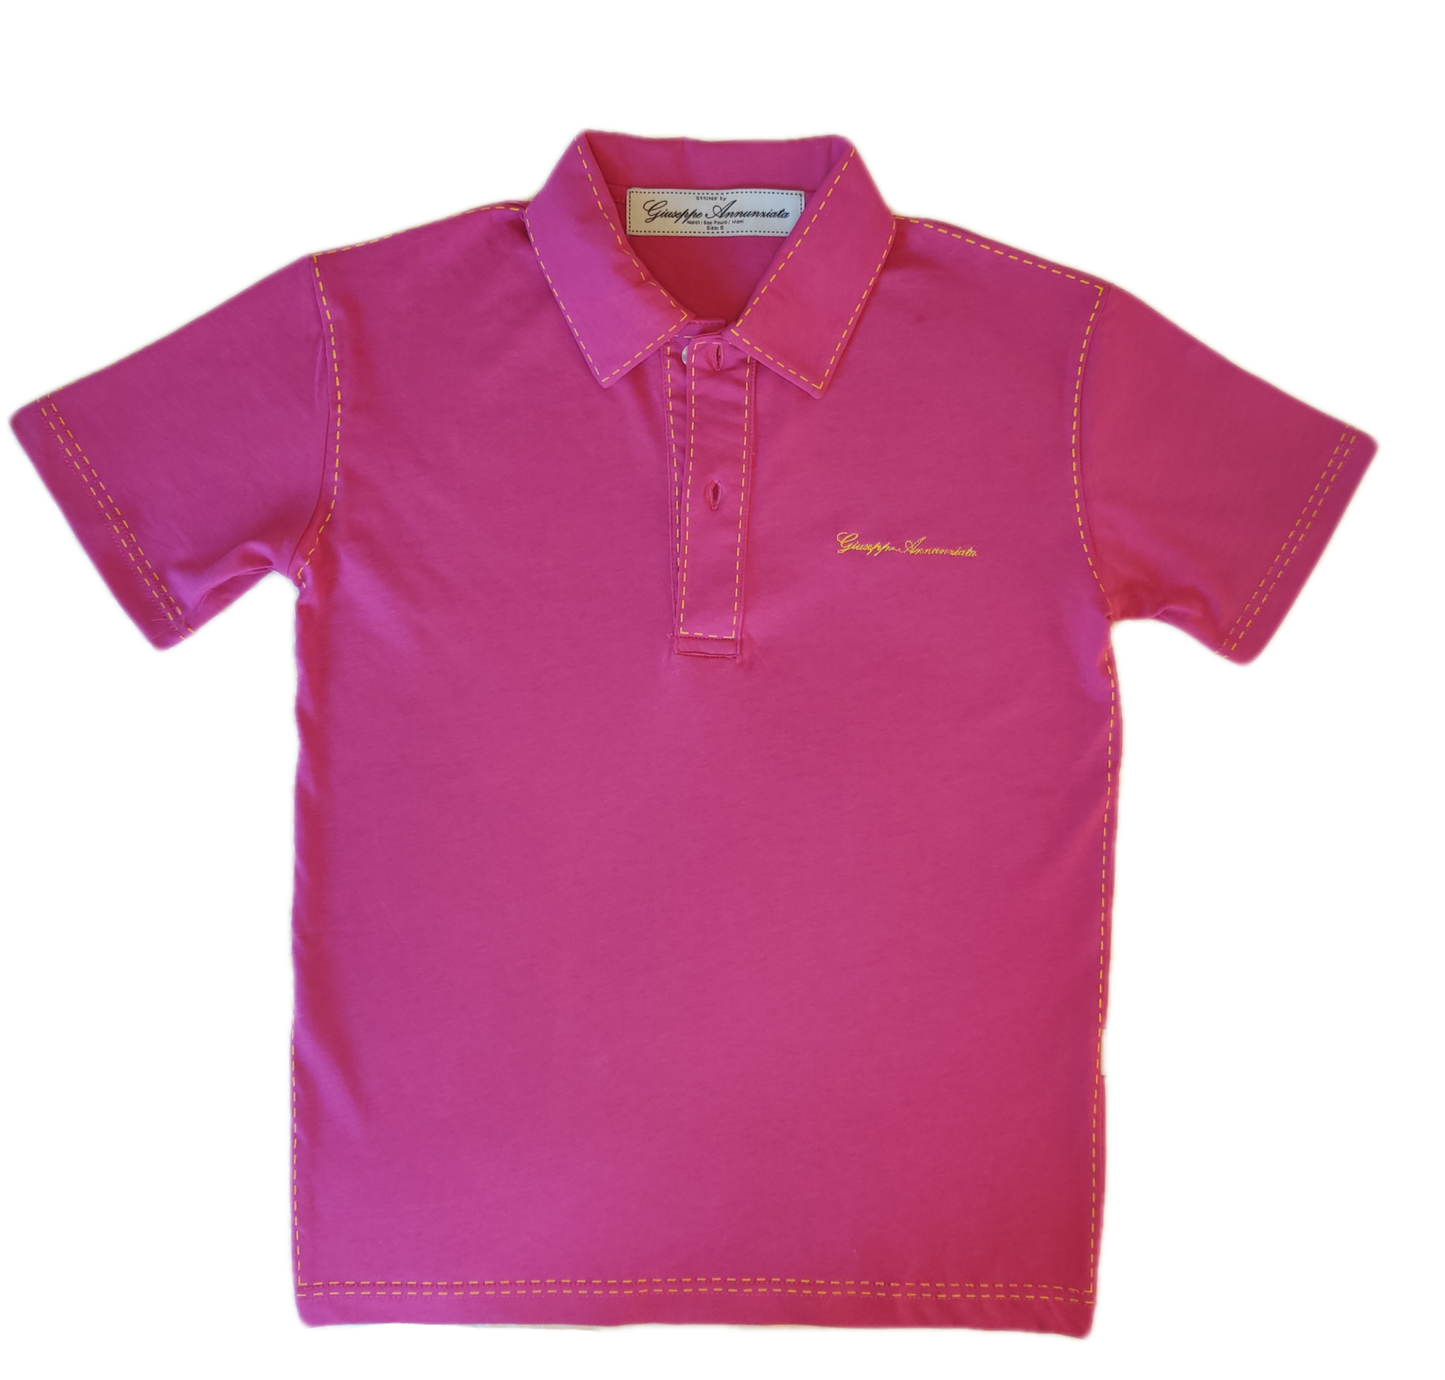 Stitches Polo Pale Pink and Black